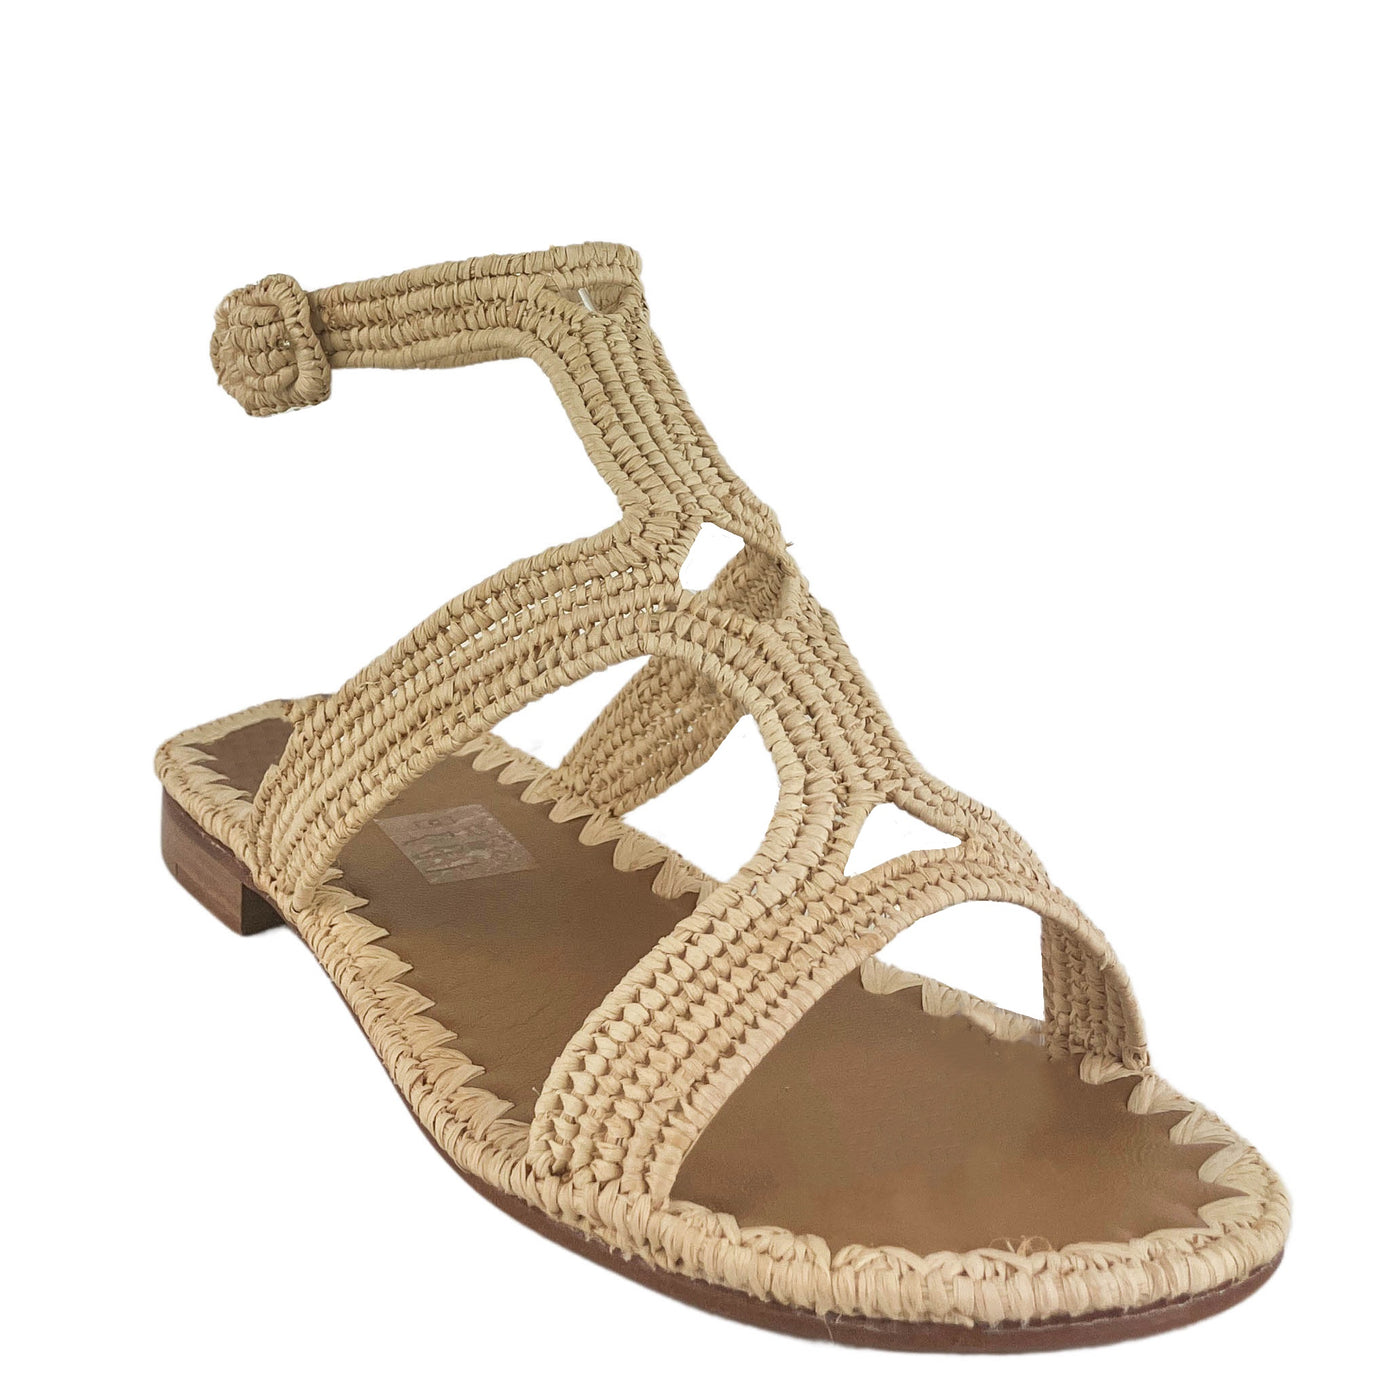 Carrie Forbes Hind Raffia Slides in Natural - Discounts on Carrie Forbes at UAL